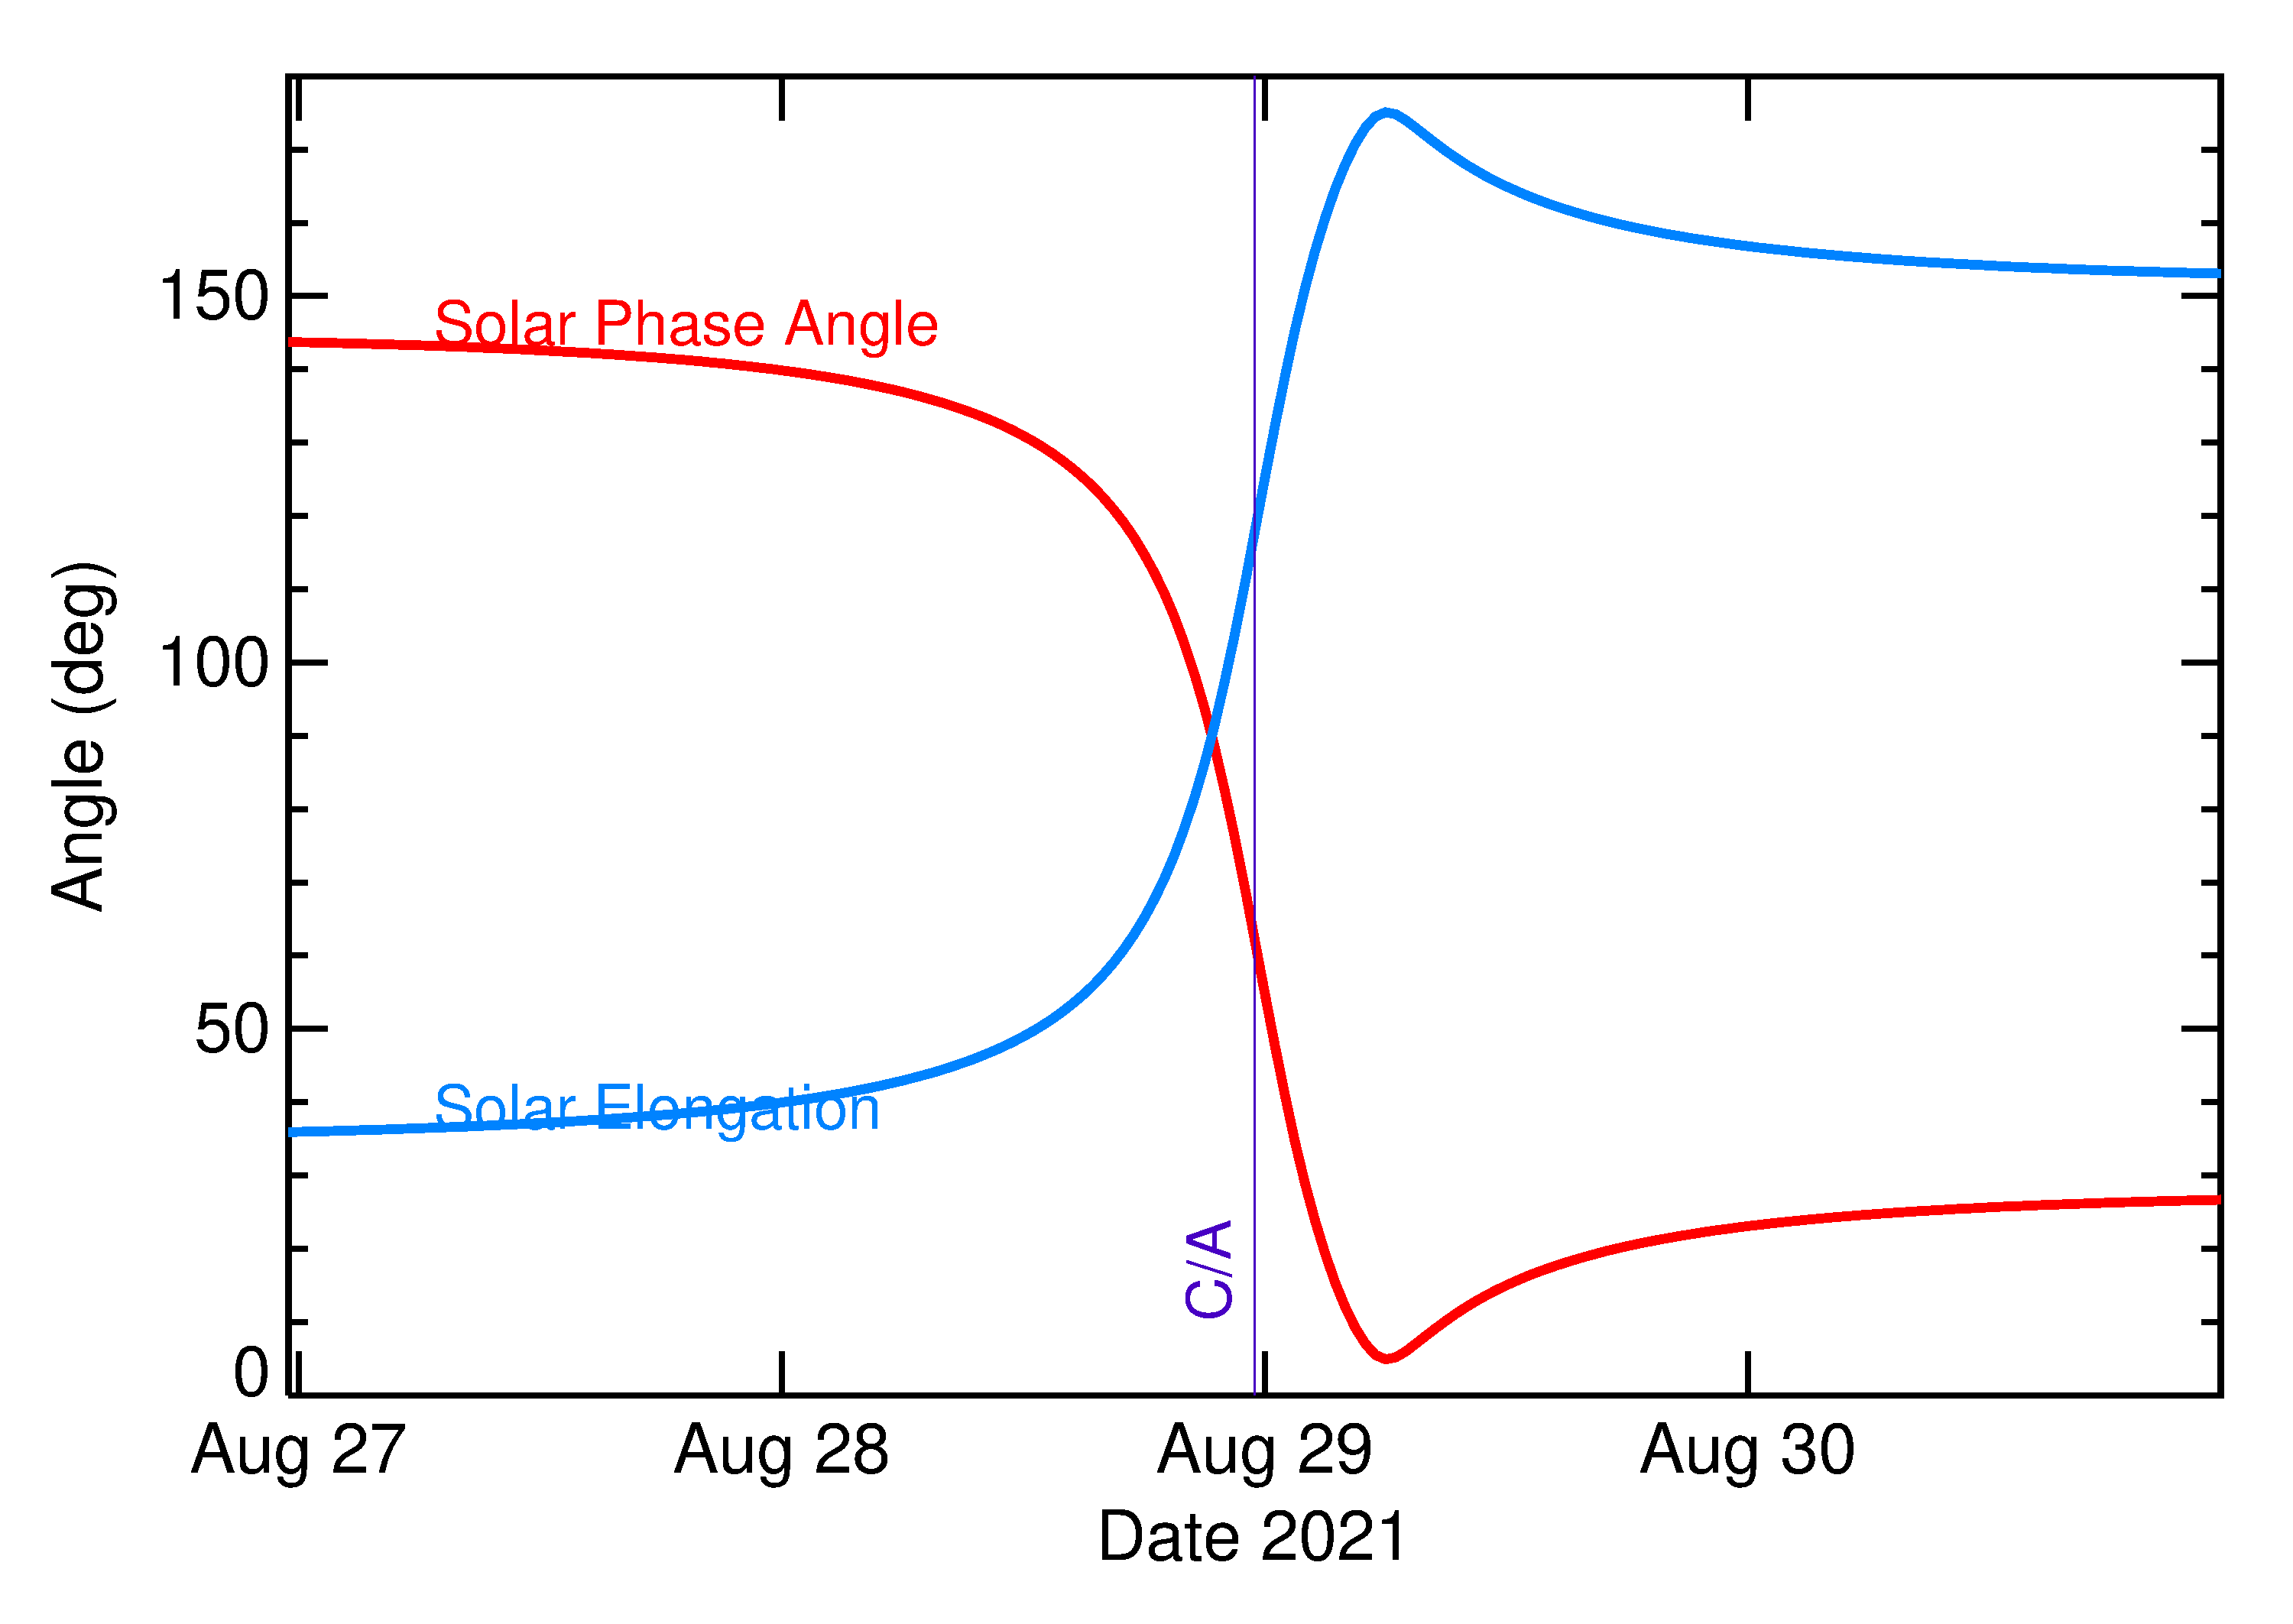 Solar Elongation and Solar Phase Angle of 2021 QV3 in the days around closest approach